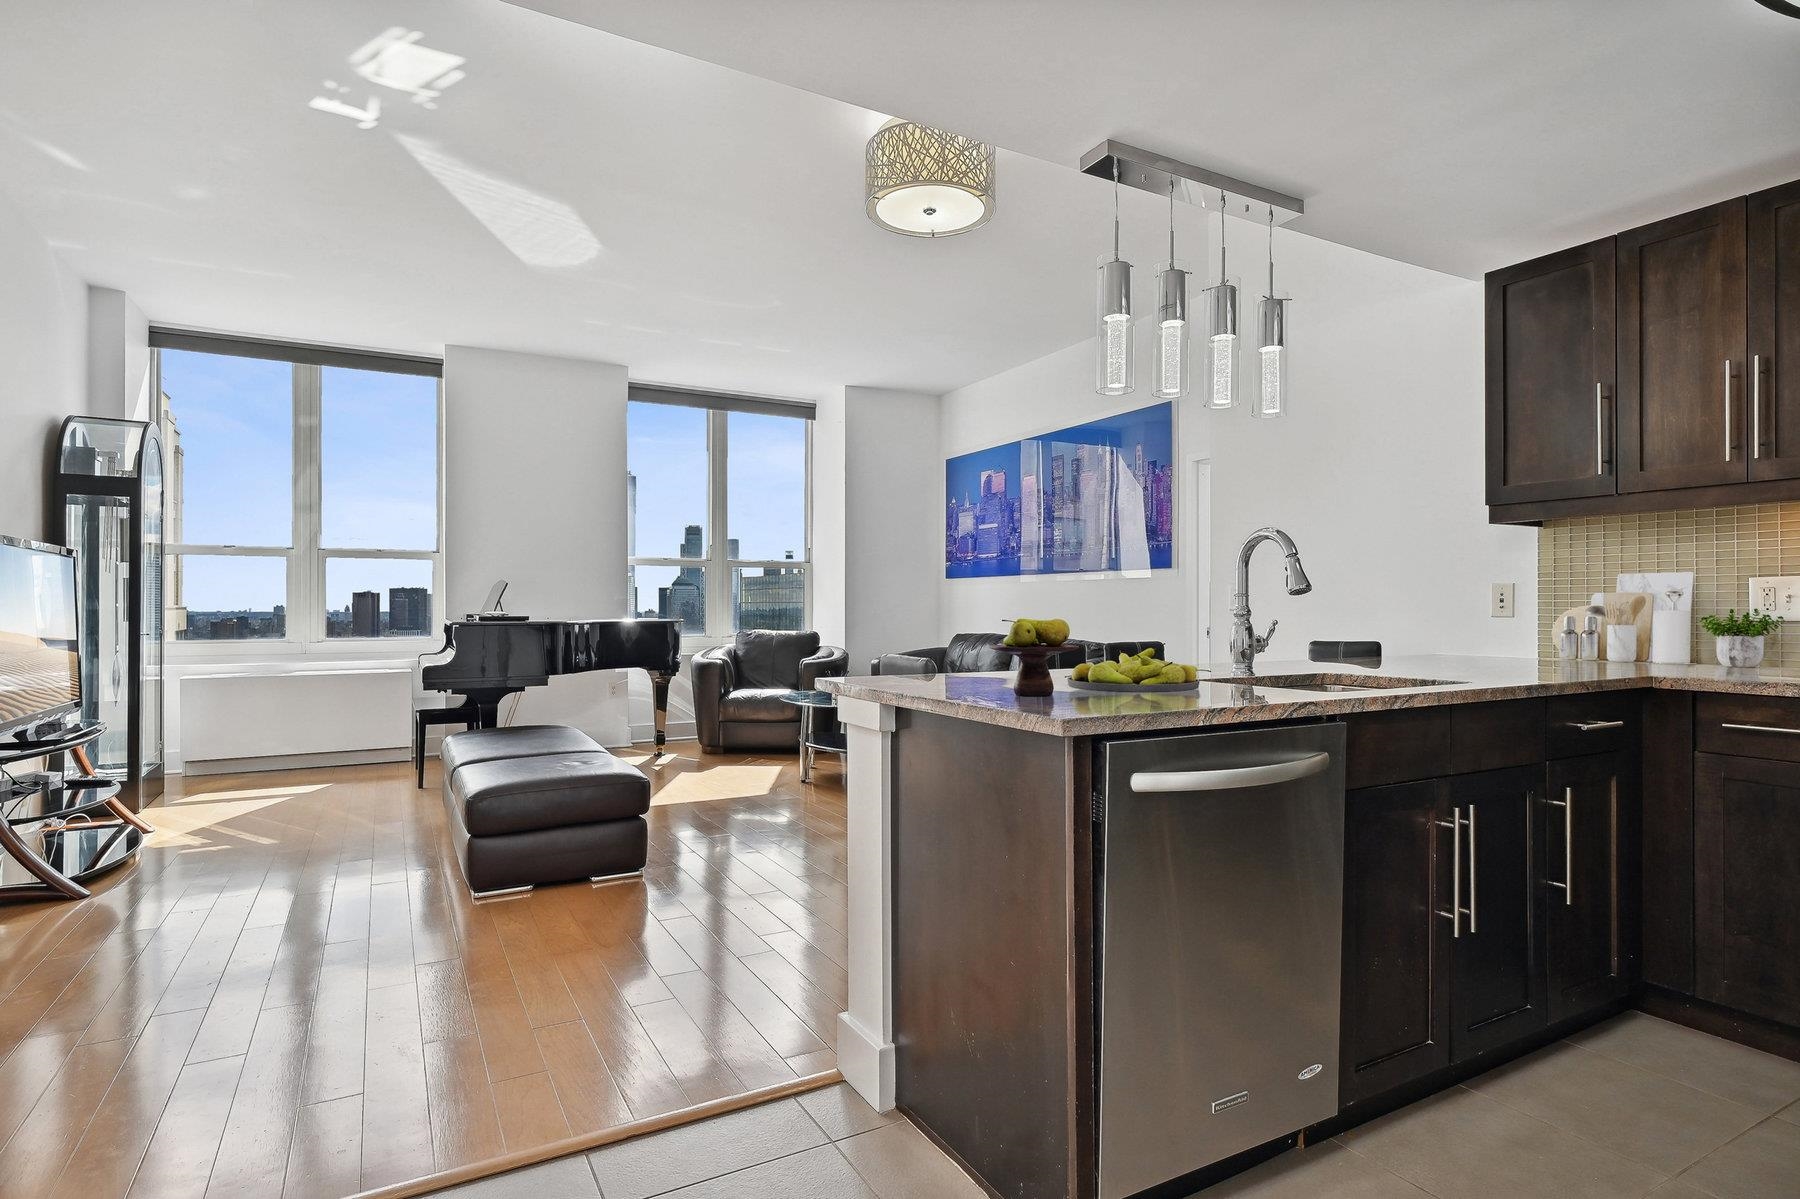 # 240006582 - For Rent in JERSEY CITY - Downtown NJ